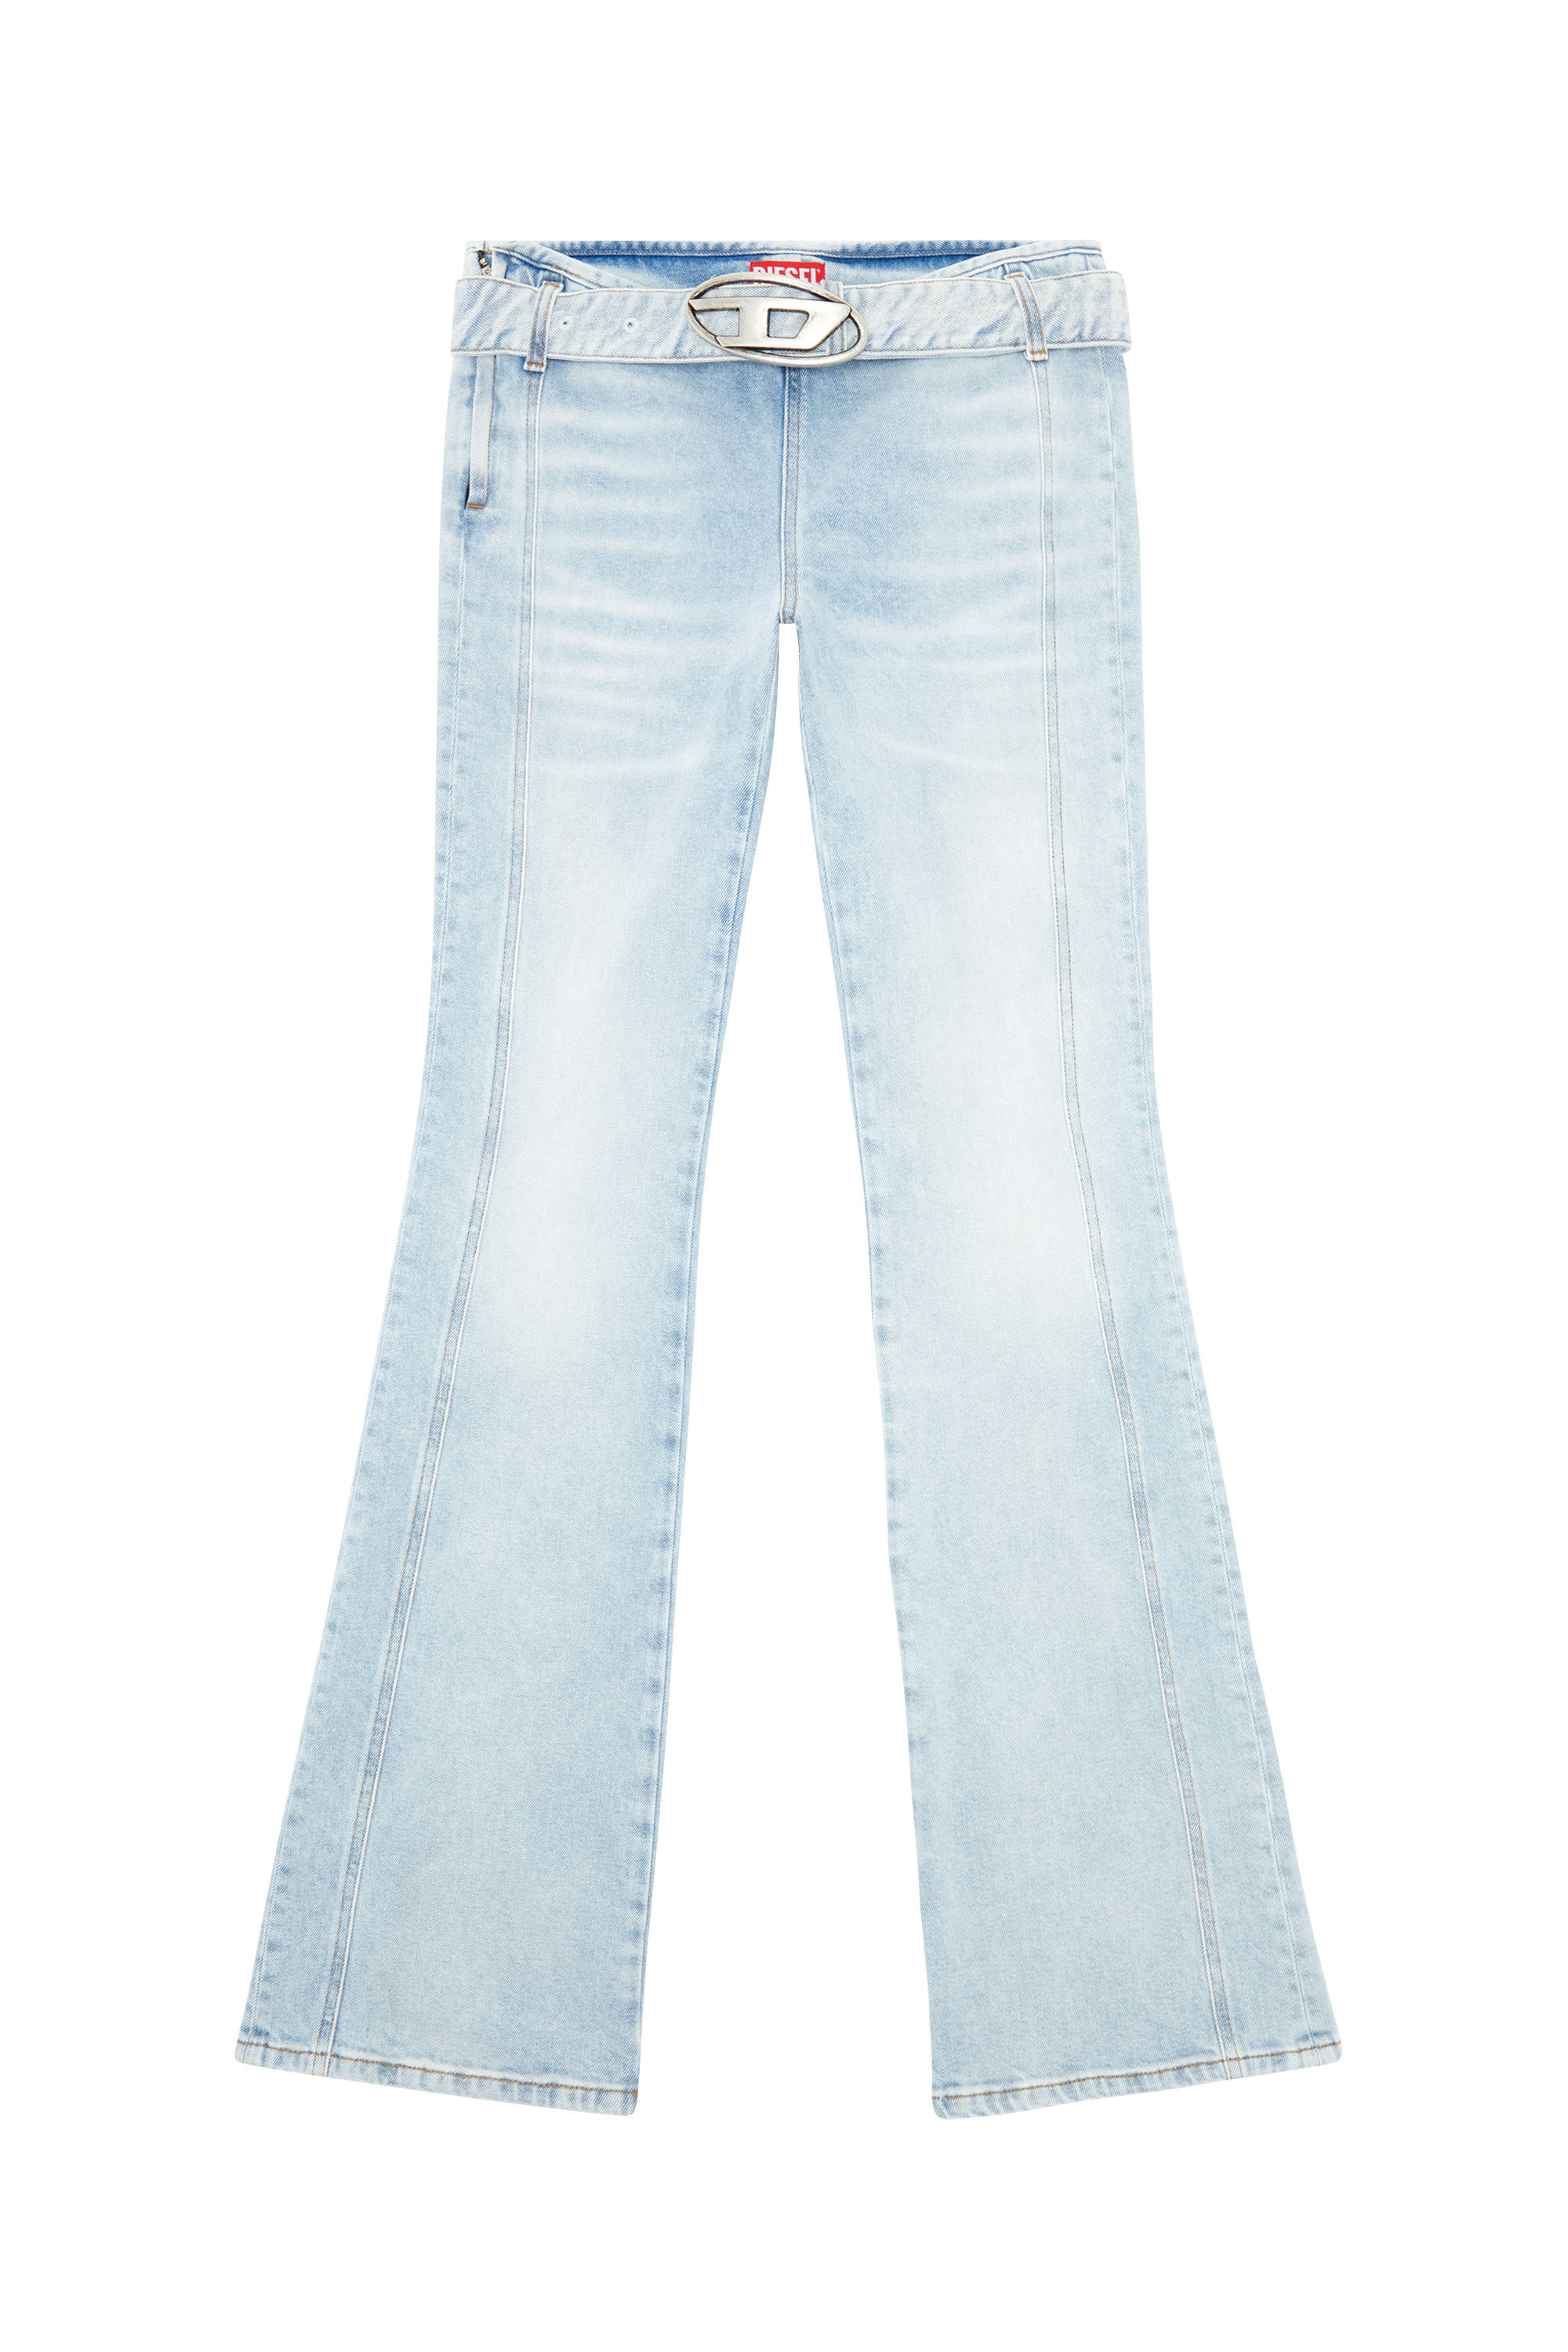 Diesel - Bootcut and Flare Jeans D-Ebbybelt 0JGAA, Mujer Bootcut y Flare Jeans - D-Ebbybelt in Azul marino - Image 5